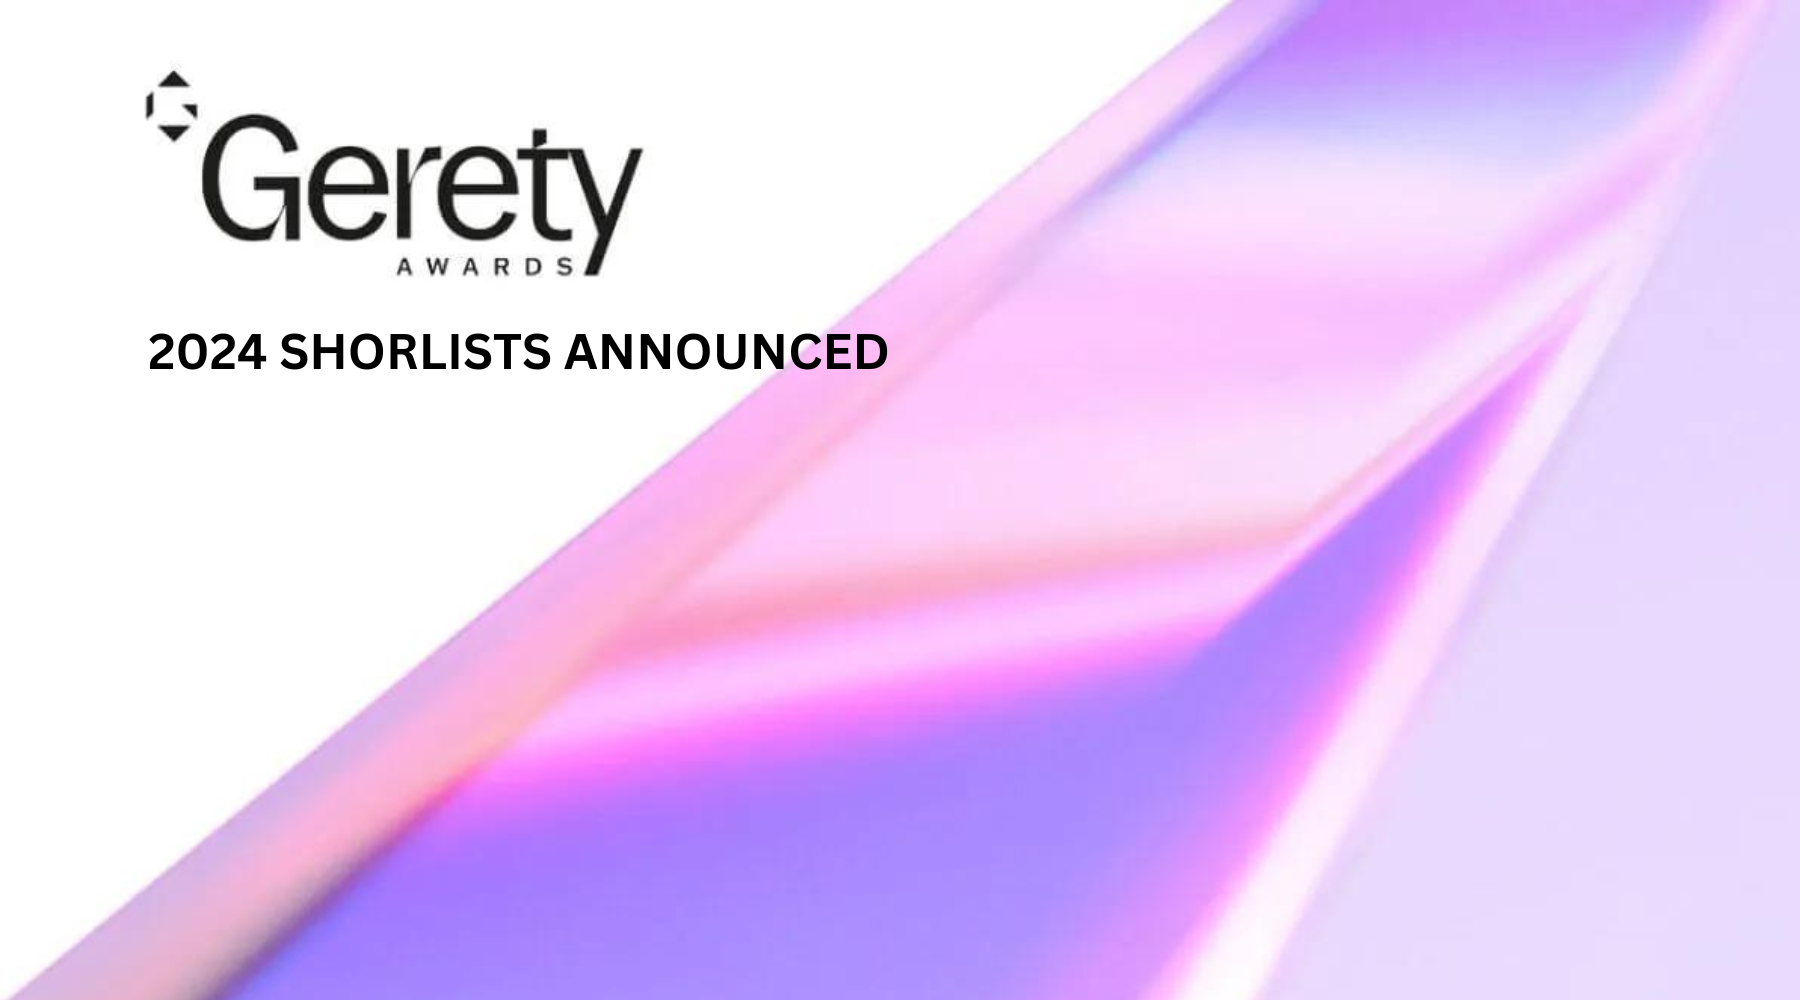 Gerety Awards Announces Shortlists for 2024